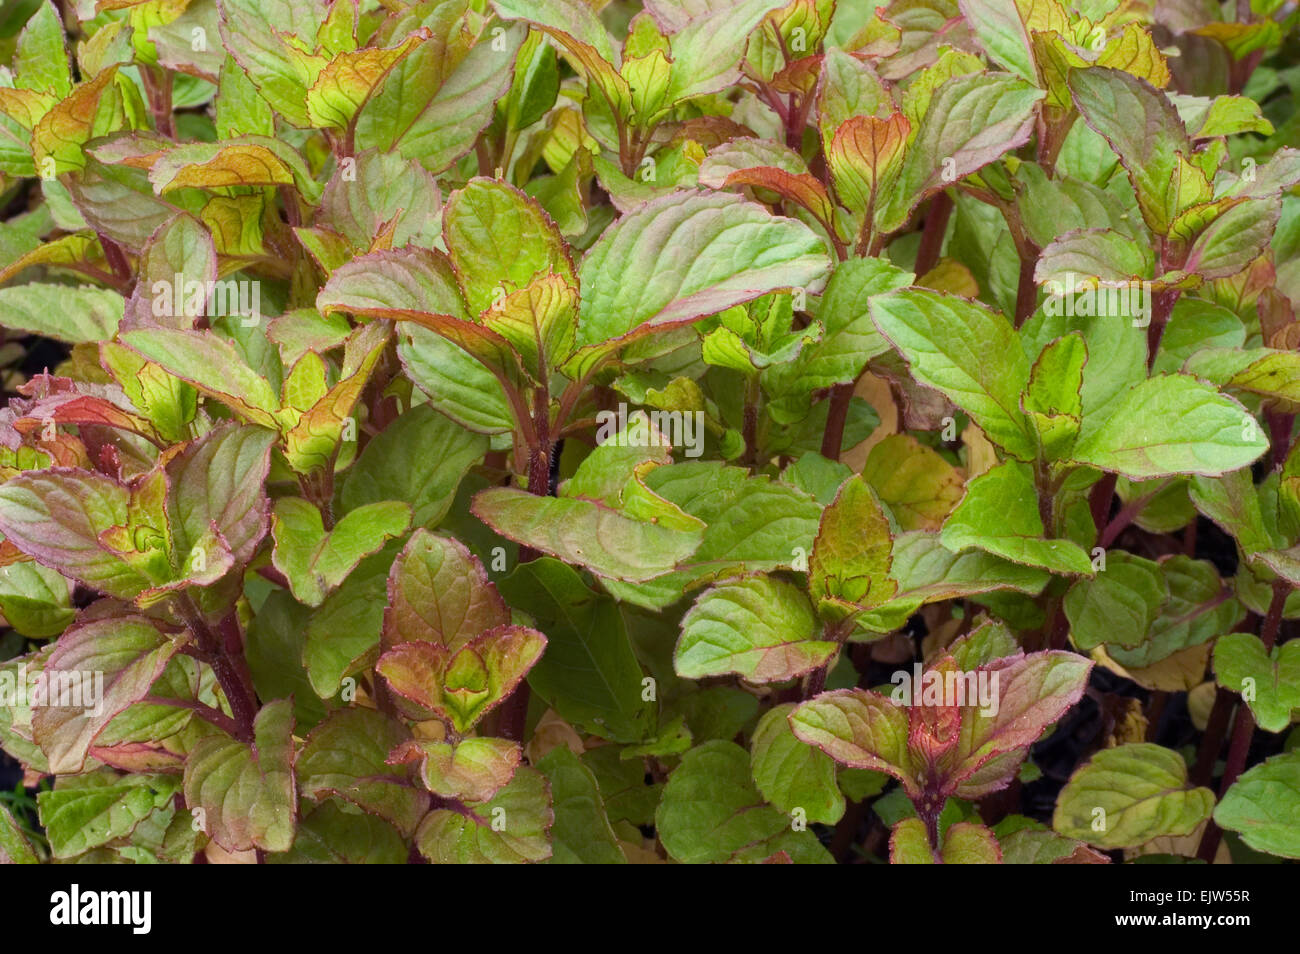 Peppermint (Mentha x piperita) close up of leaves Stock Photo